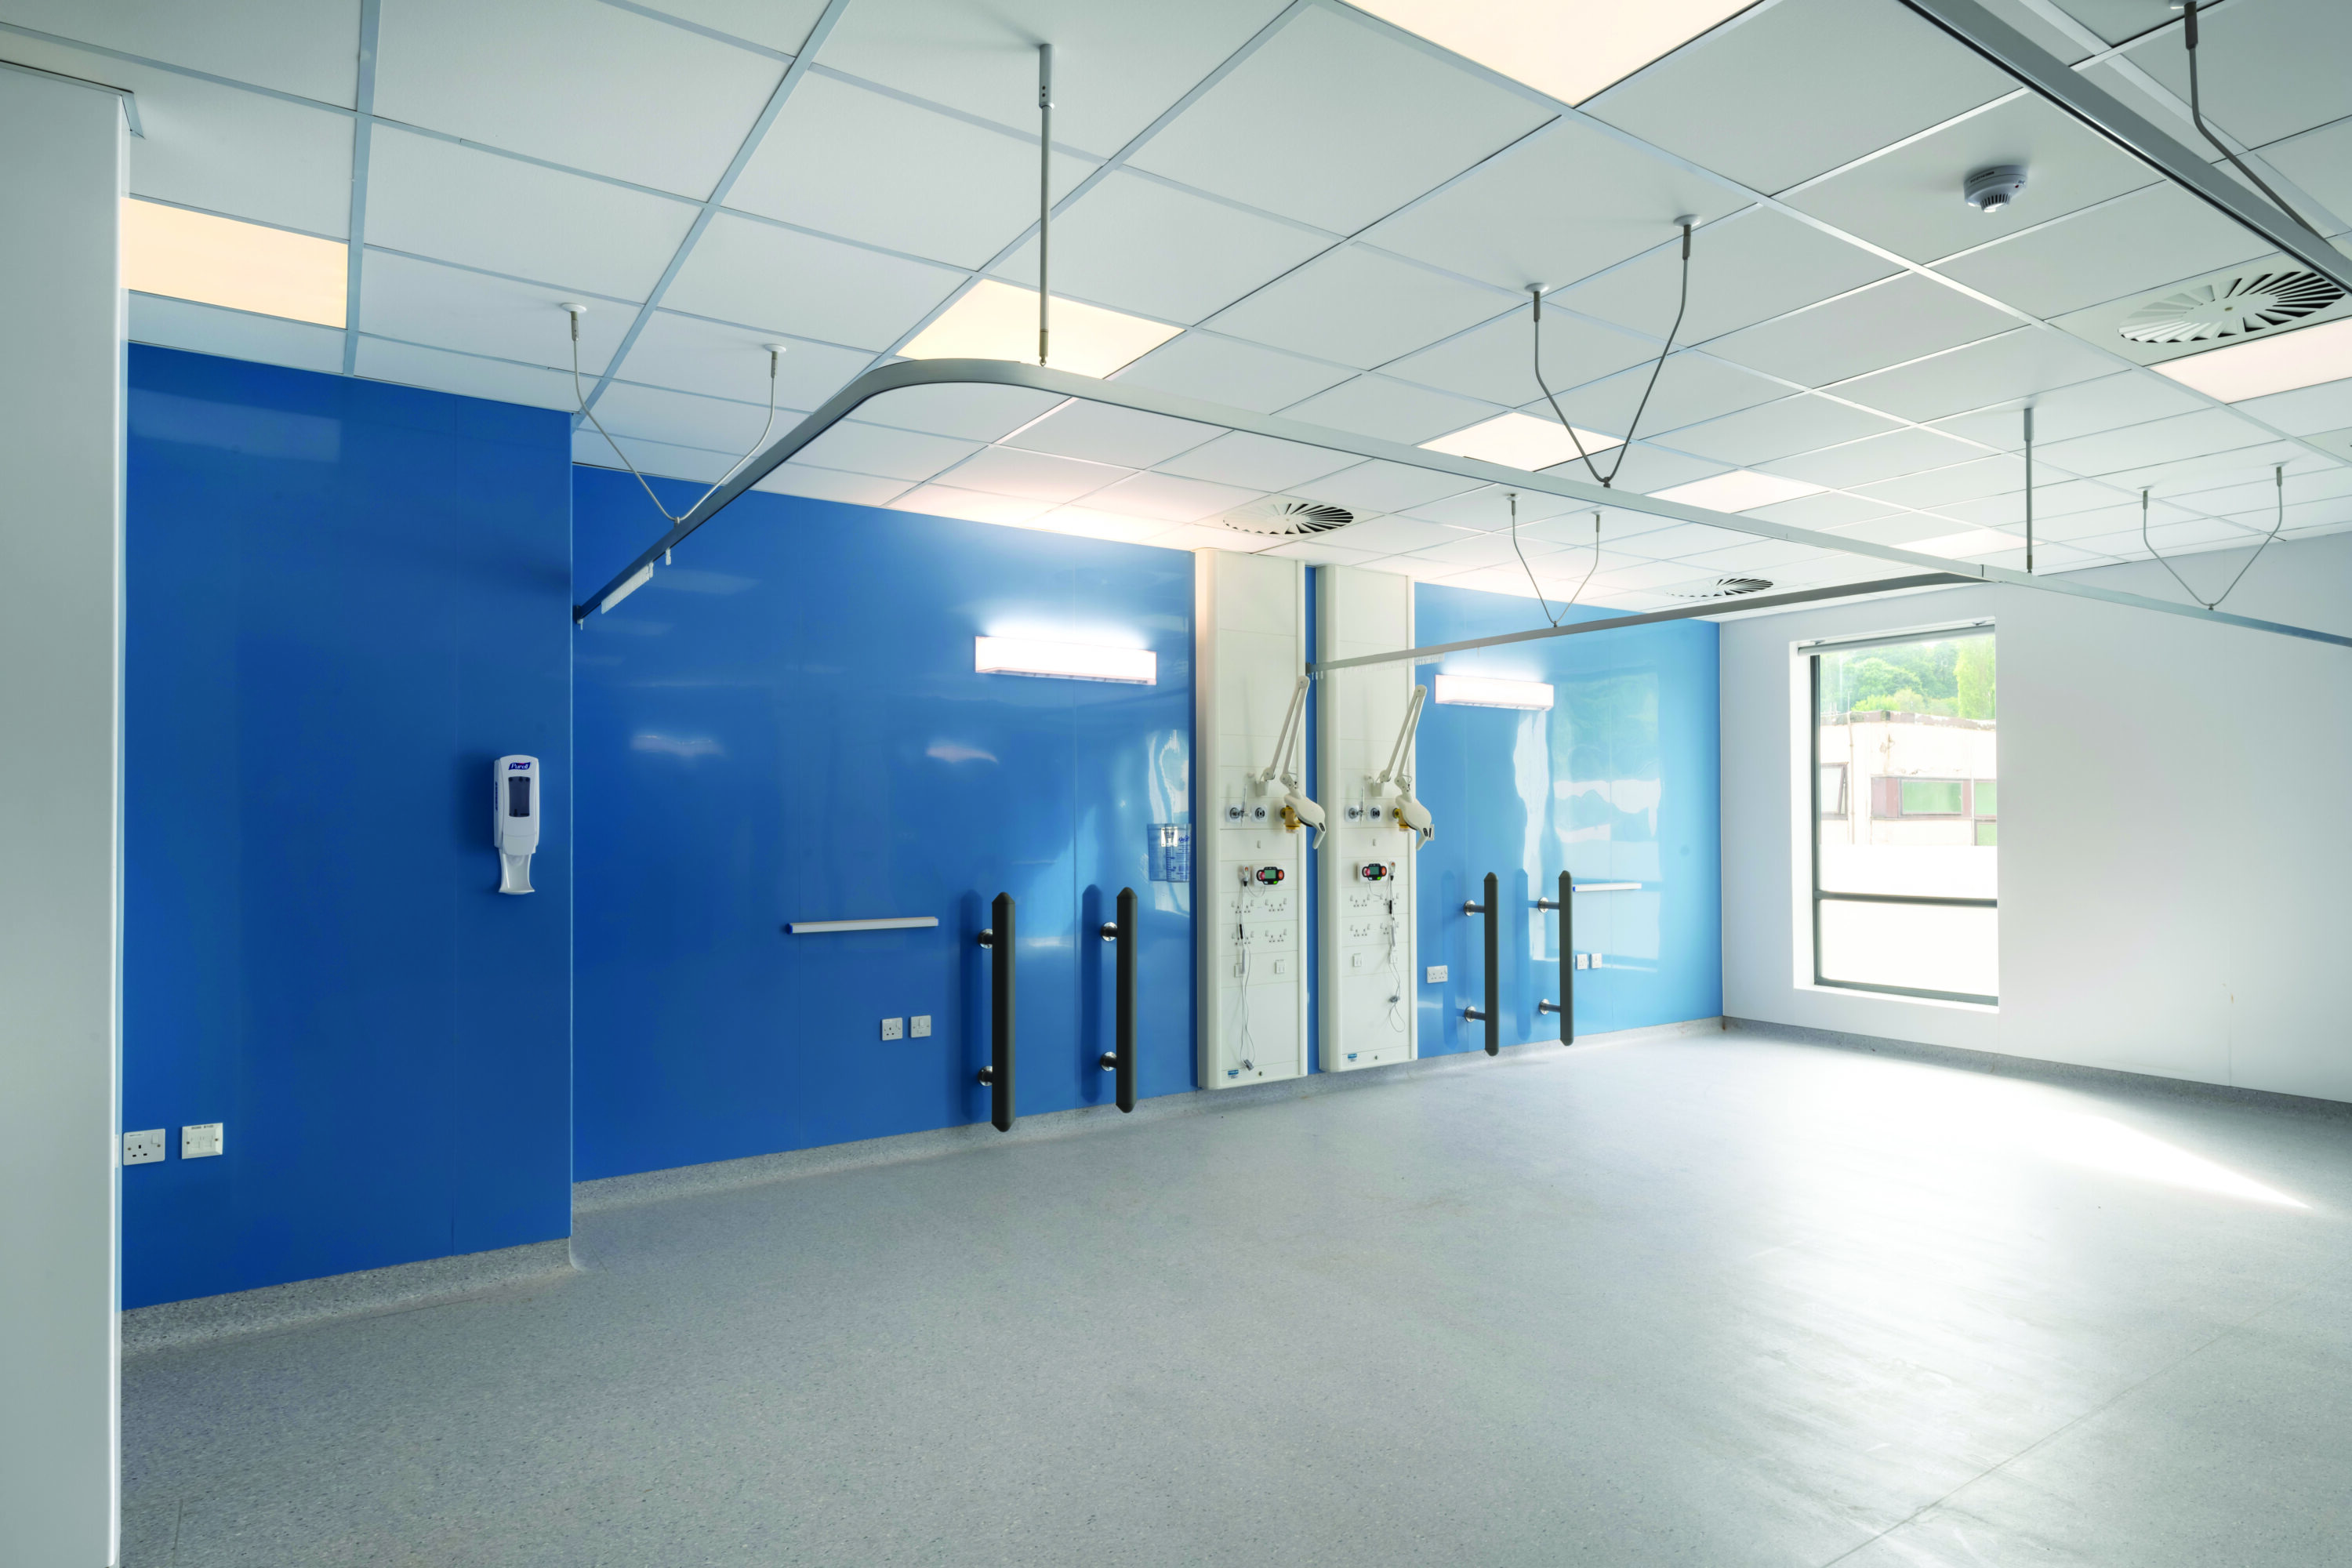 A newly finished, empty and well lit ward room. The rearmost wall is blue while the others are white, there is a large window to the right and the floor is a grey mottled vinyl.